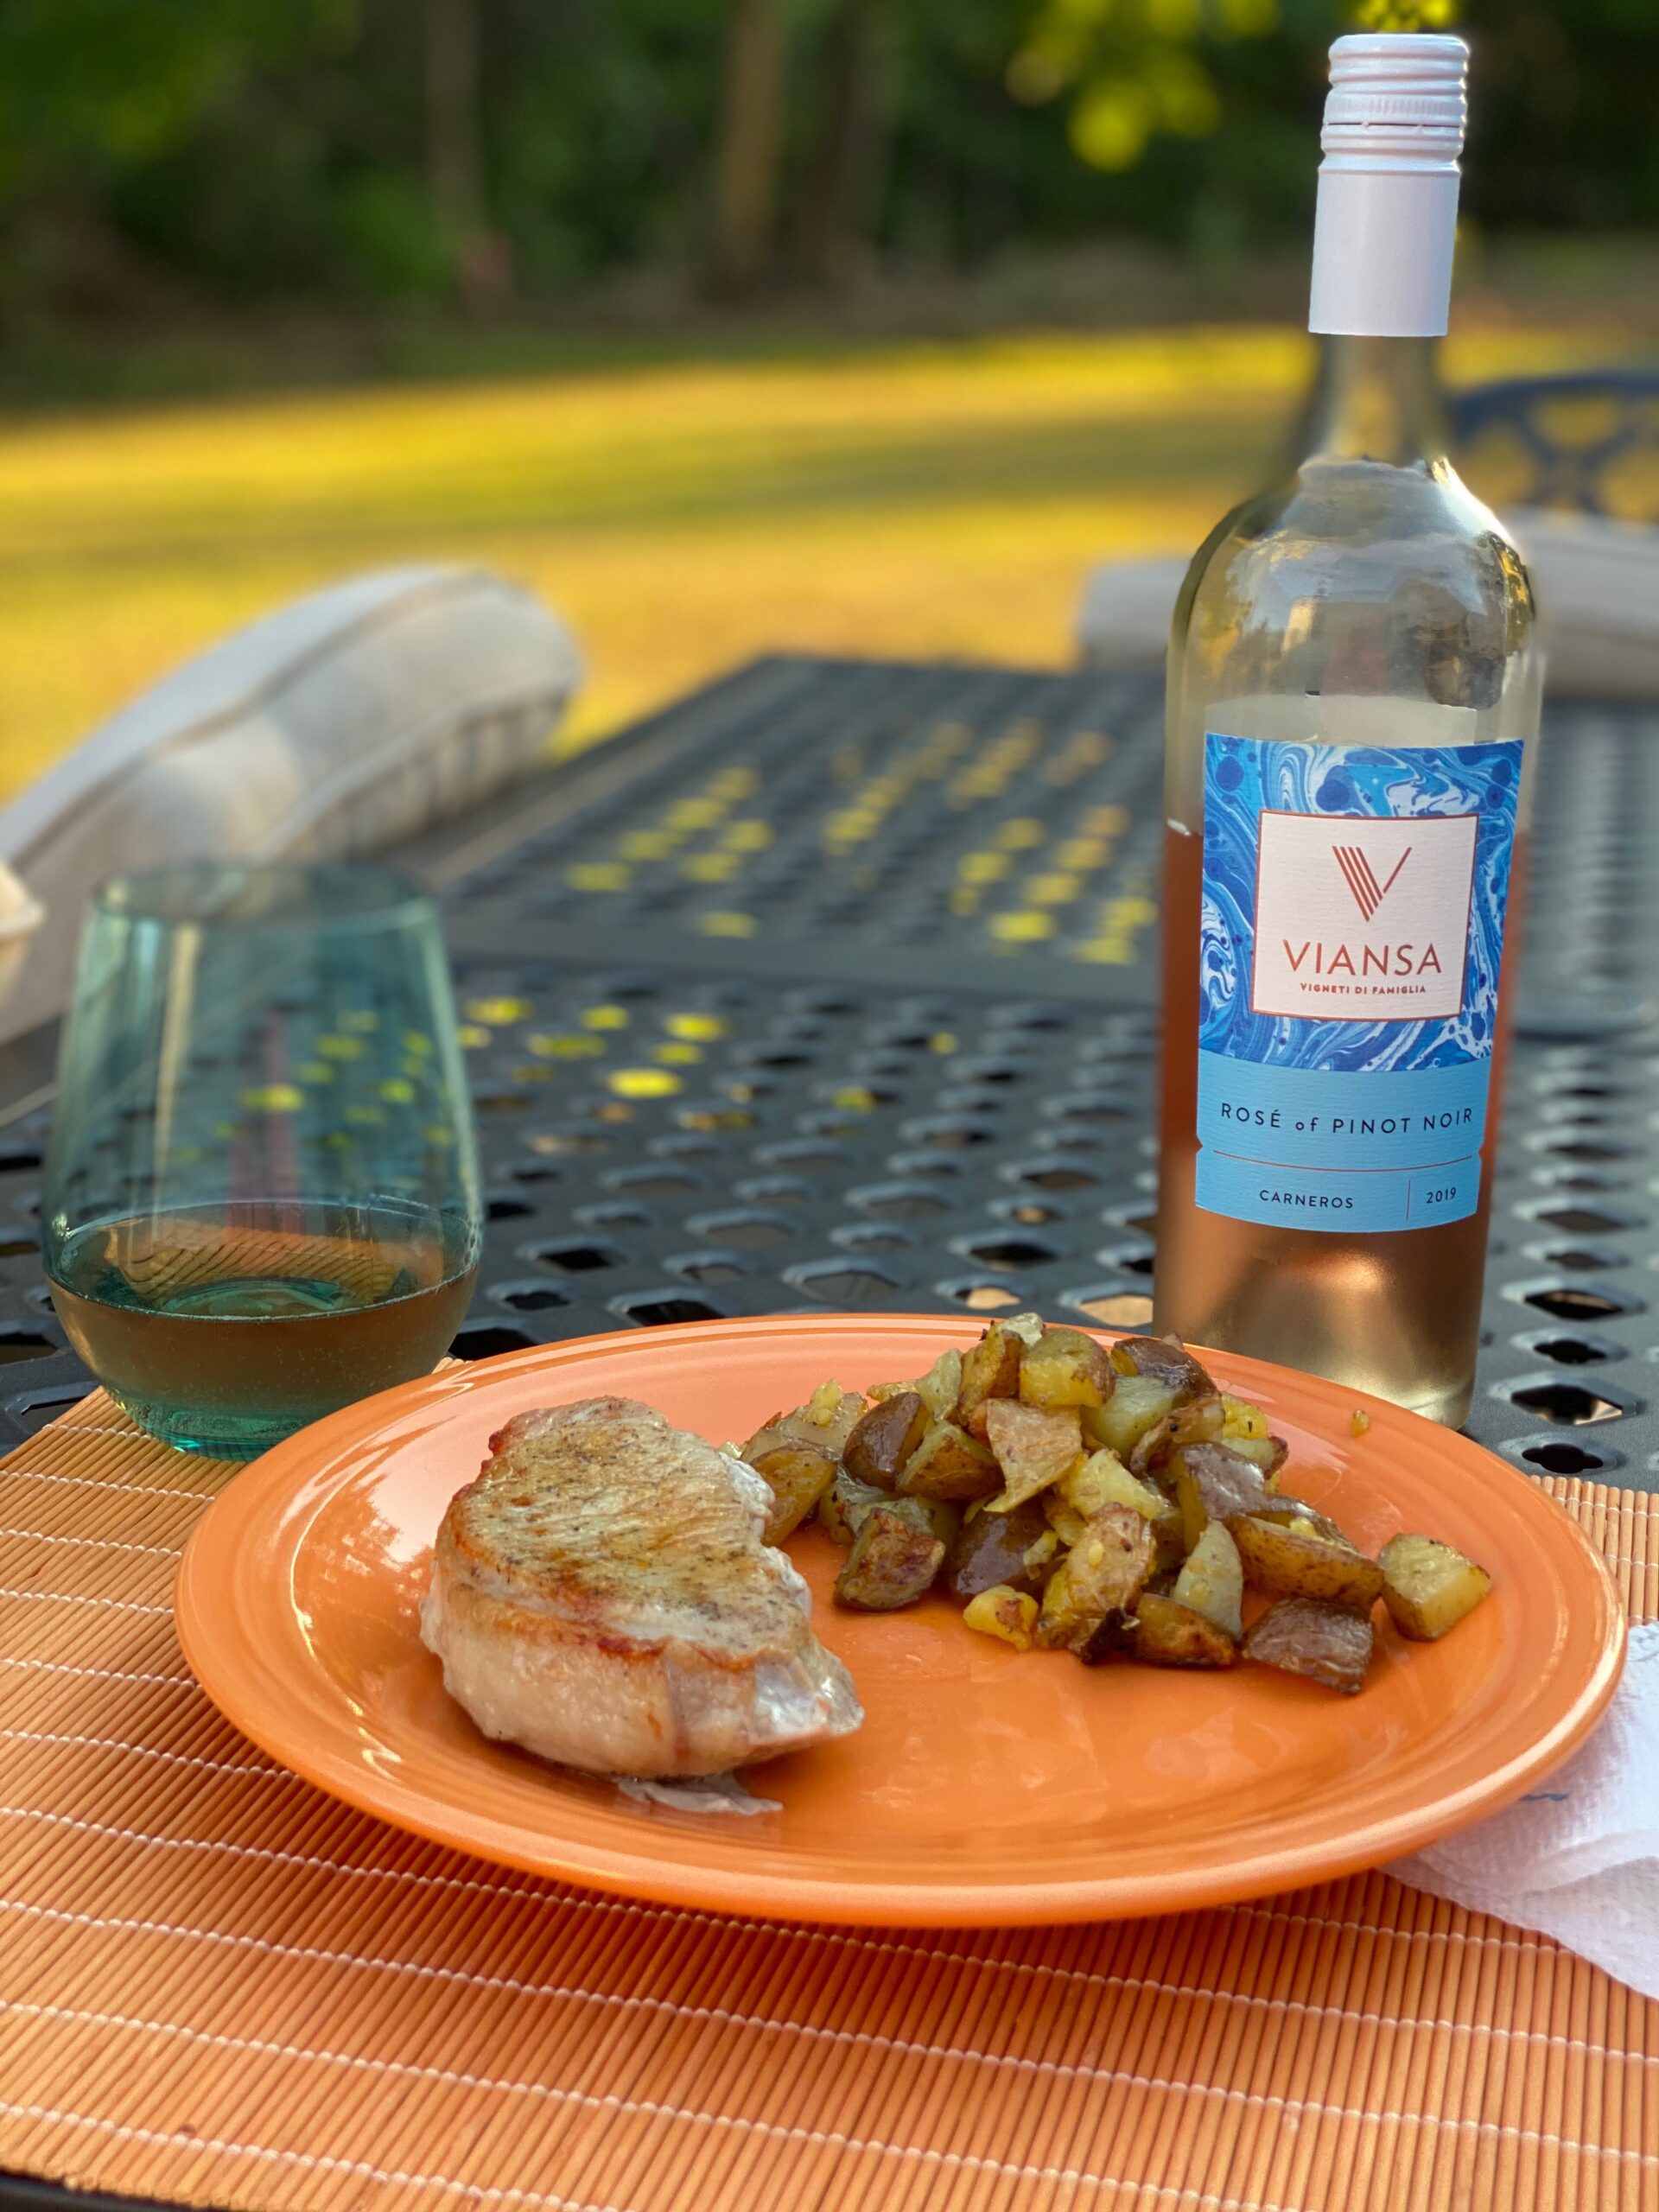 Rose of Pinot Noir paired with Pork Chops